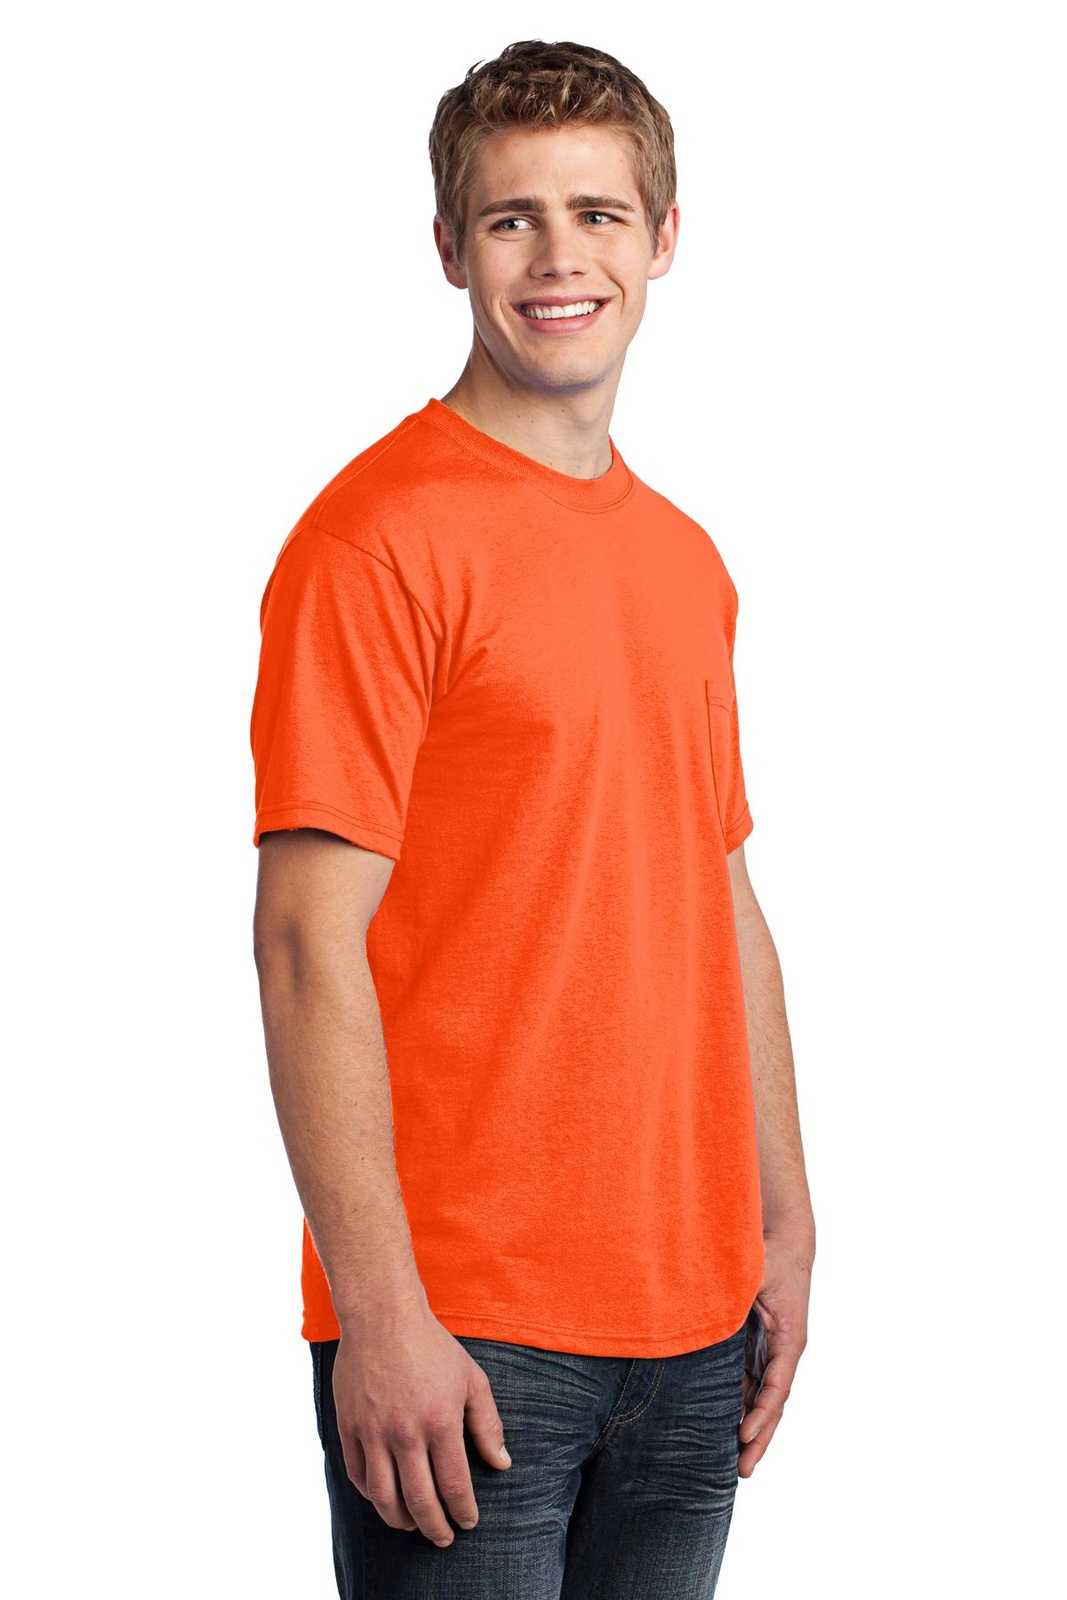 Port &amp; Company USA100P All-American Pocket Tee - Safety Orange - HIT a Double - 4